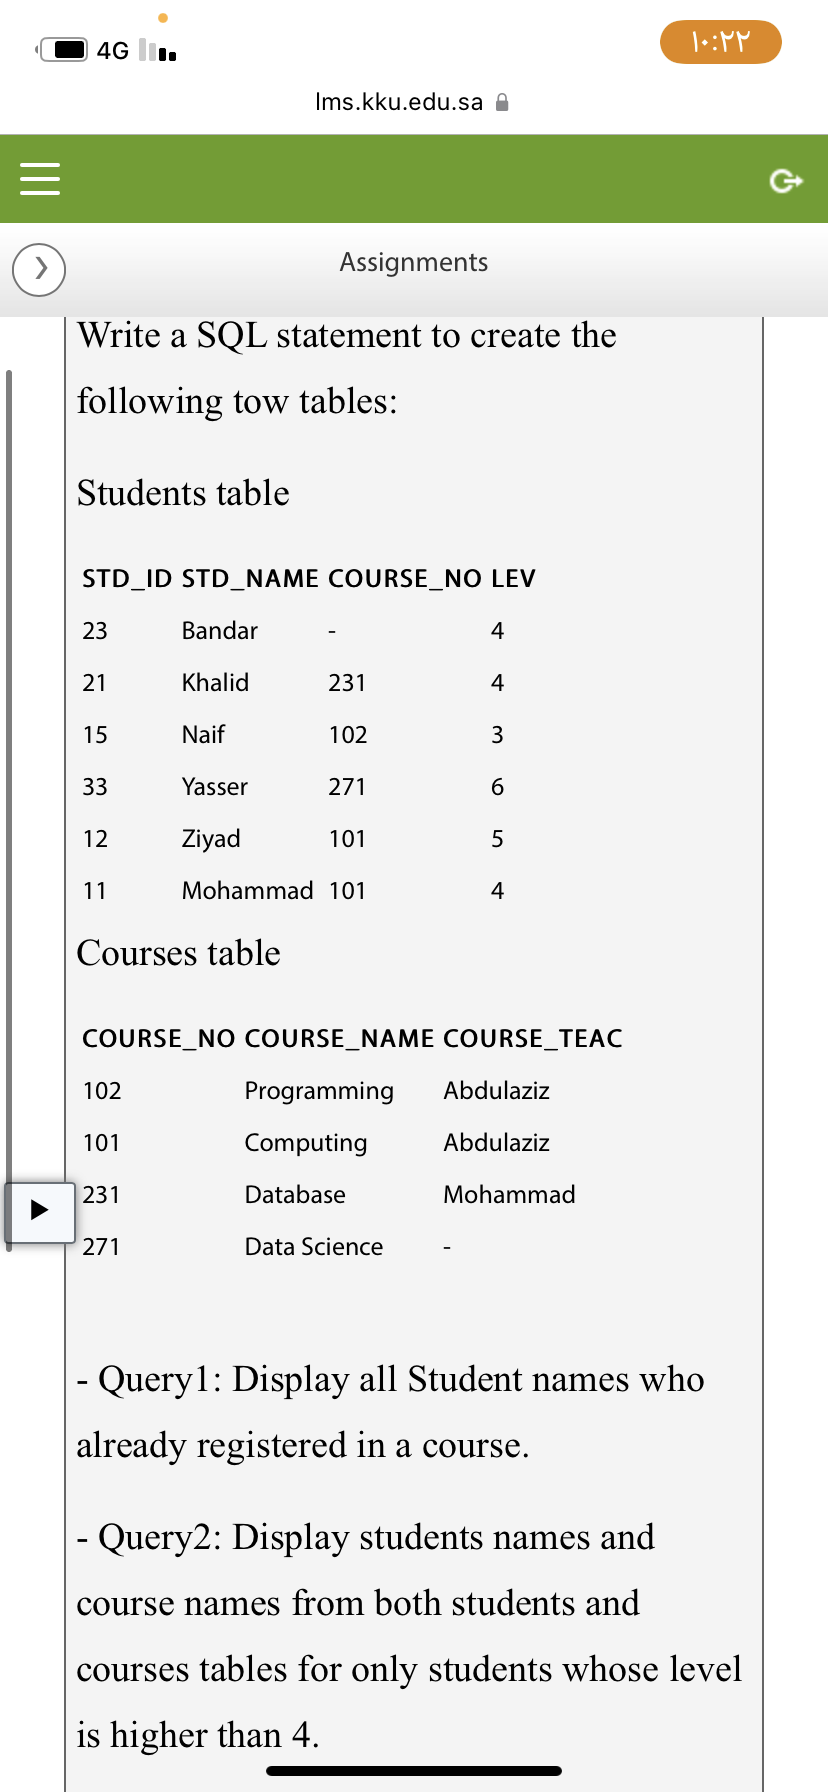 |||
>
4G
Students table
Write a SQL statement to create the
following tow tables:
23
STD_ID STD_NAME COURSE_NO LEV
21
15
33
12
11
Bandar
Khalid
Naif
102
Ims.kku.edu.sa
Yasser
Ziyad
Courses table
101
231
271
Assignments
231
102
271
101
Mohammad 101
4
Data Science
4
3
6
COURSE NO COURSE_NAME COURSE_TEAC
Programming Abdulaziz
Computing
Abdulaziz
Database
Mohammad
5
4
۱۰:۲۲
- Query1: Display all Student names who
already registered in a course.
- Query2: Display students names and
course names from both students and
courses tables for only students whose level
is higher than 4.
Ĵ